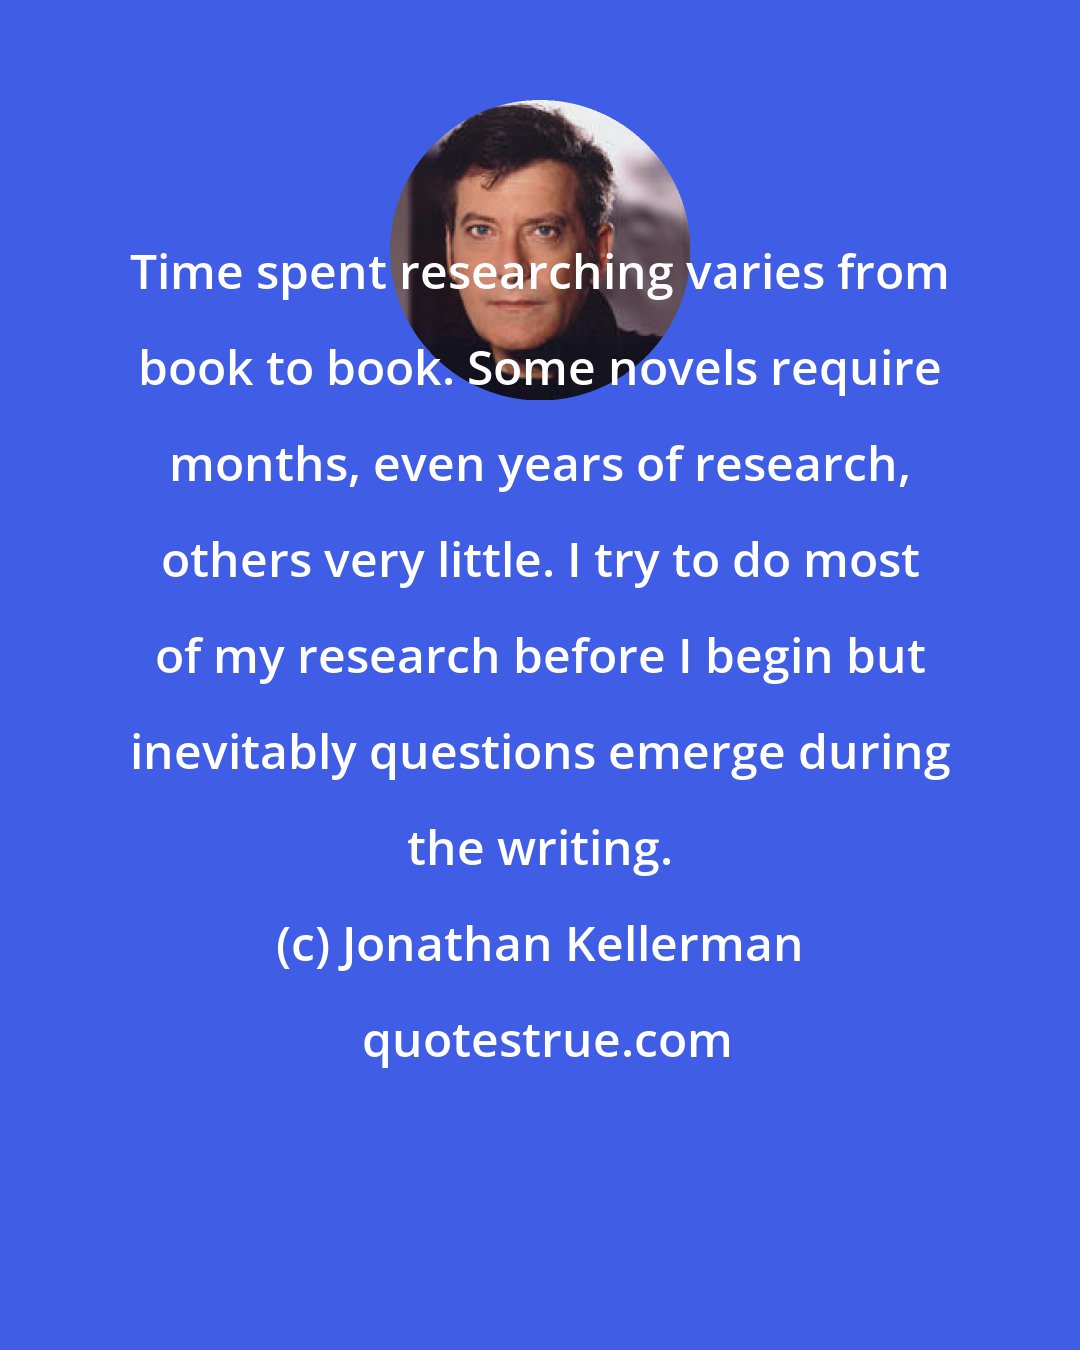 Jonathan Kellerman: Time spent researching varies from book to book. Some novels require months, even years of research, others very little. I try to do most of my research before I begin but inevitably questions emerge during the writing.